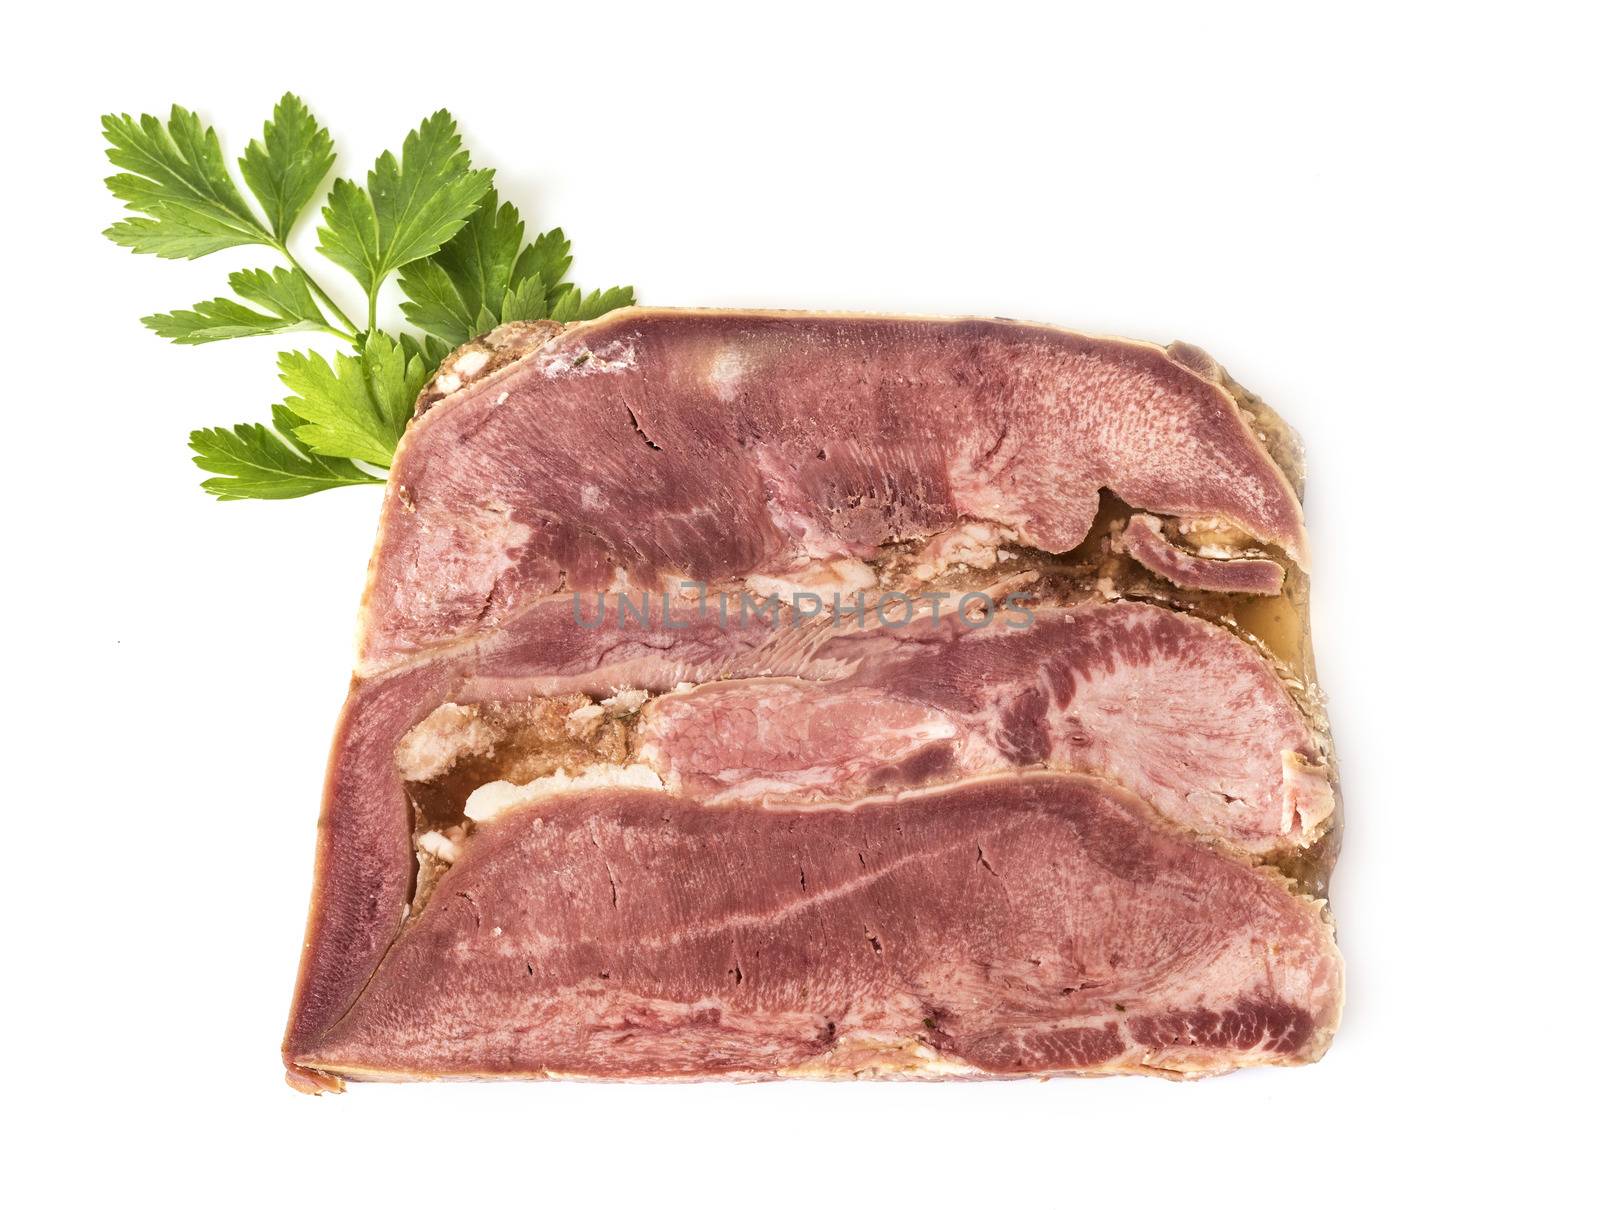 head cheese in front of white background 